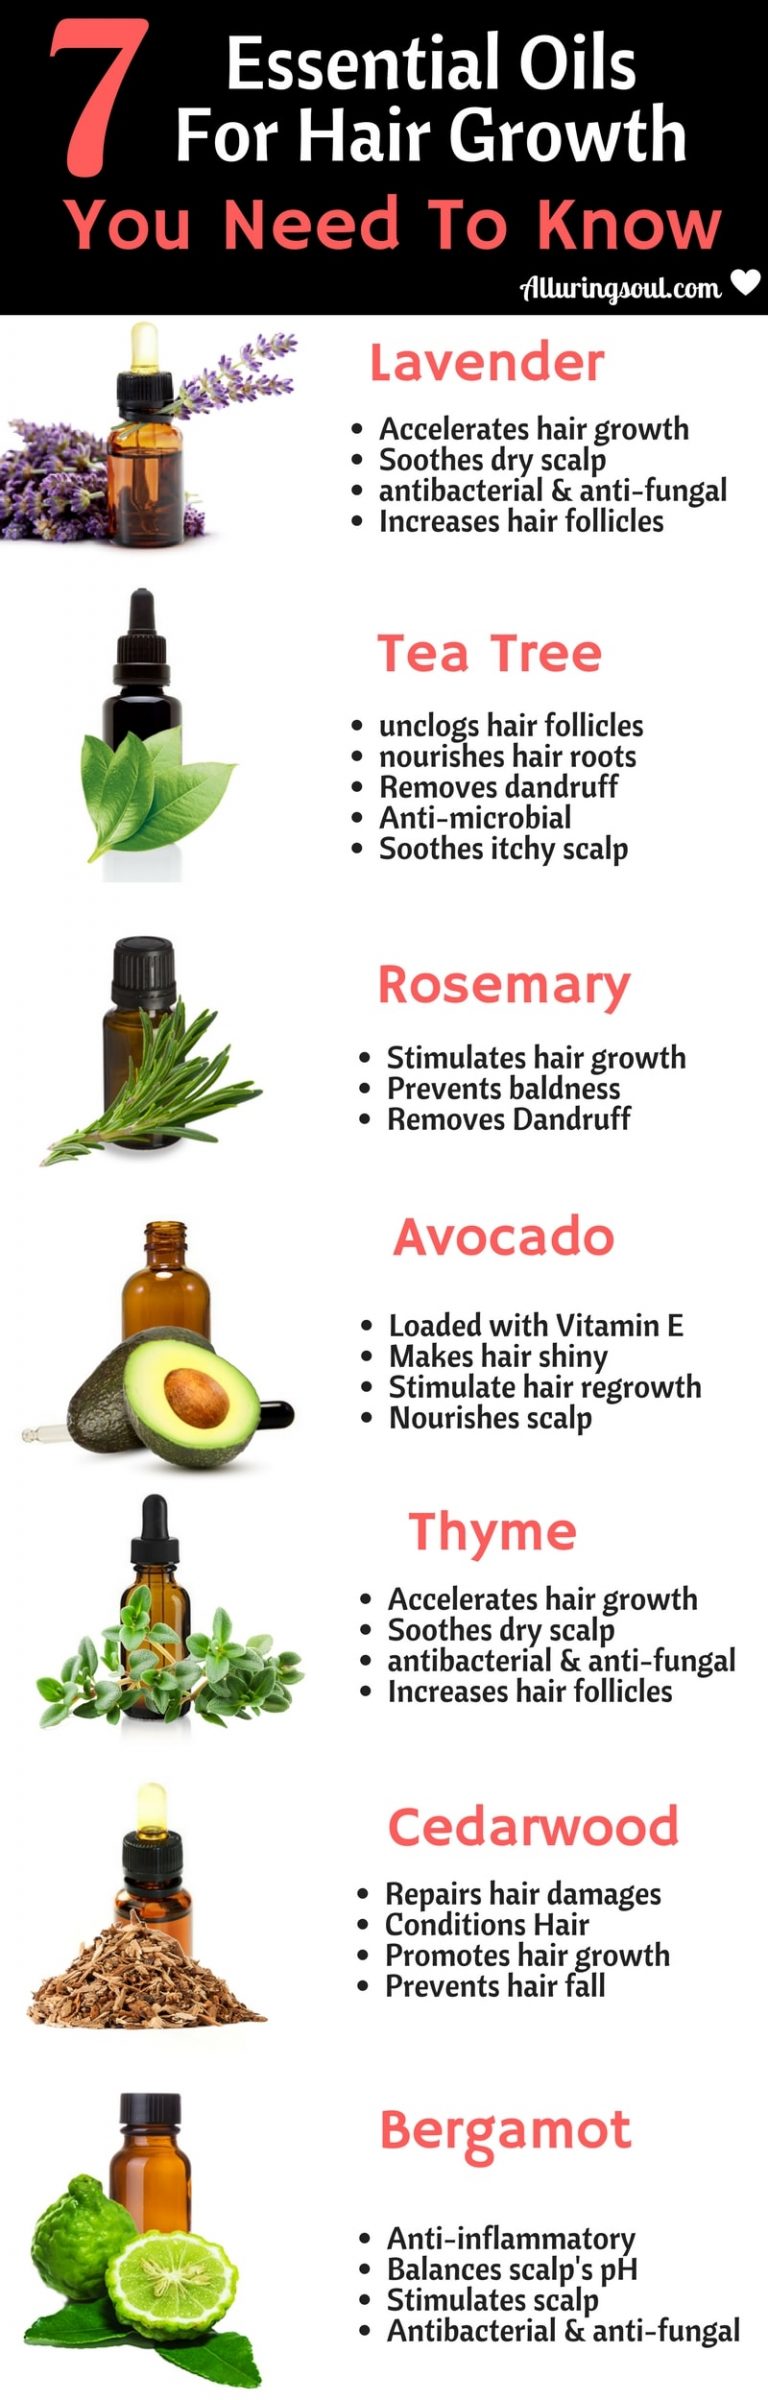 7 Best Essential Oils For Hair Growth You Need To Know 5266